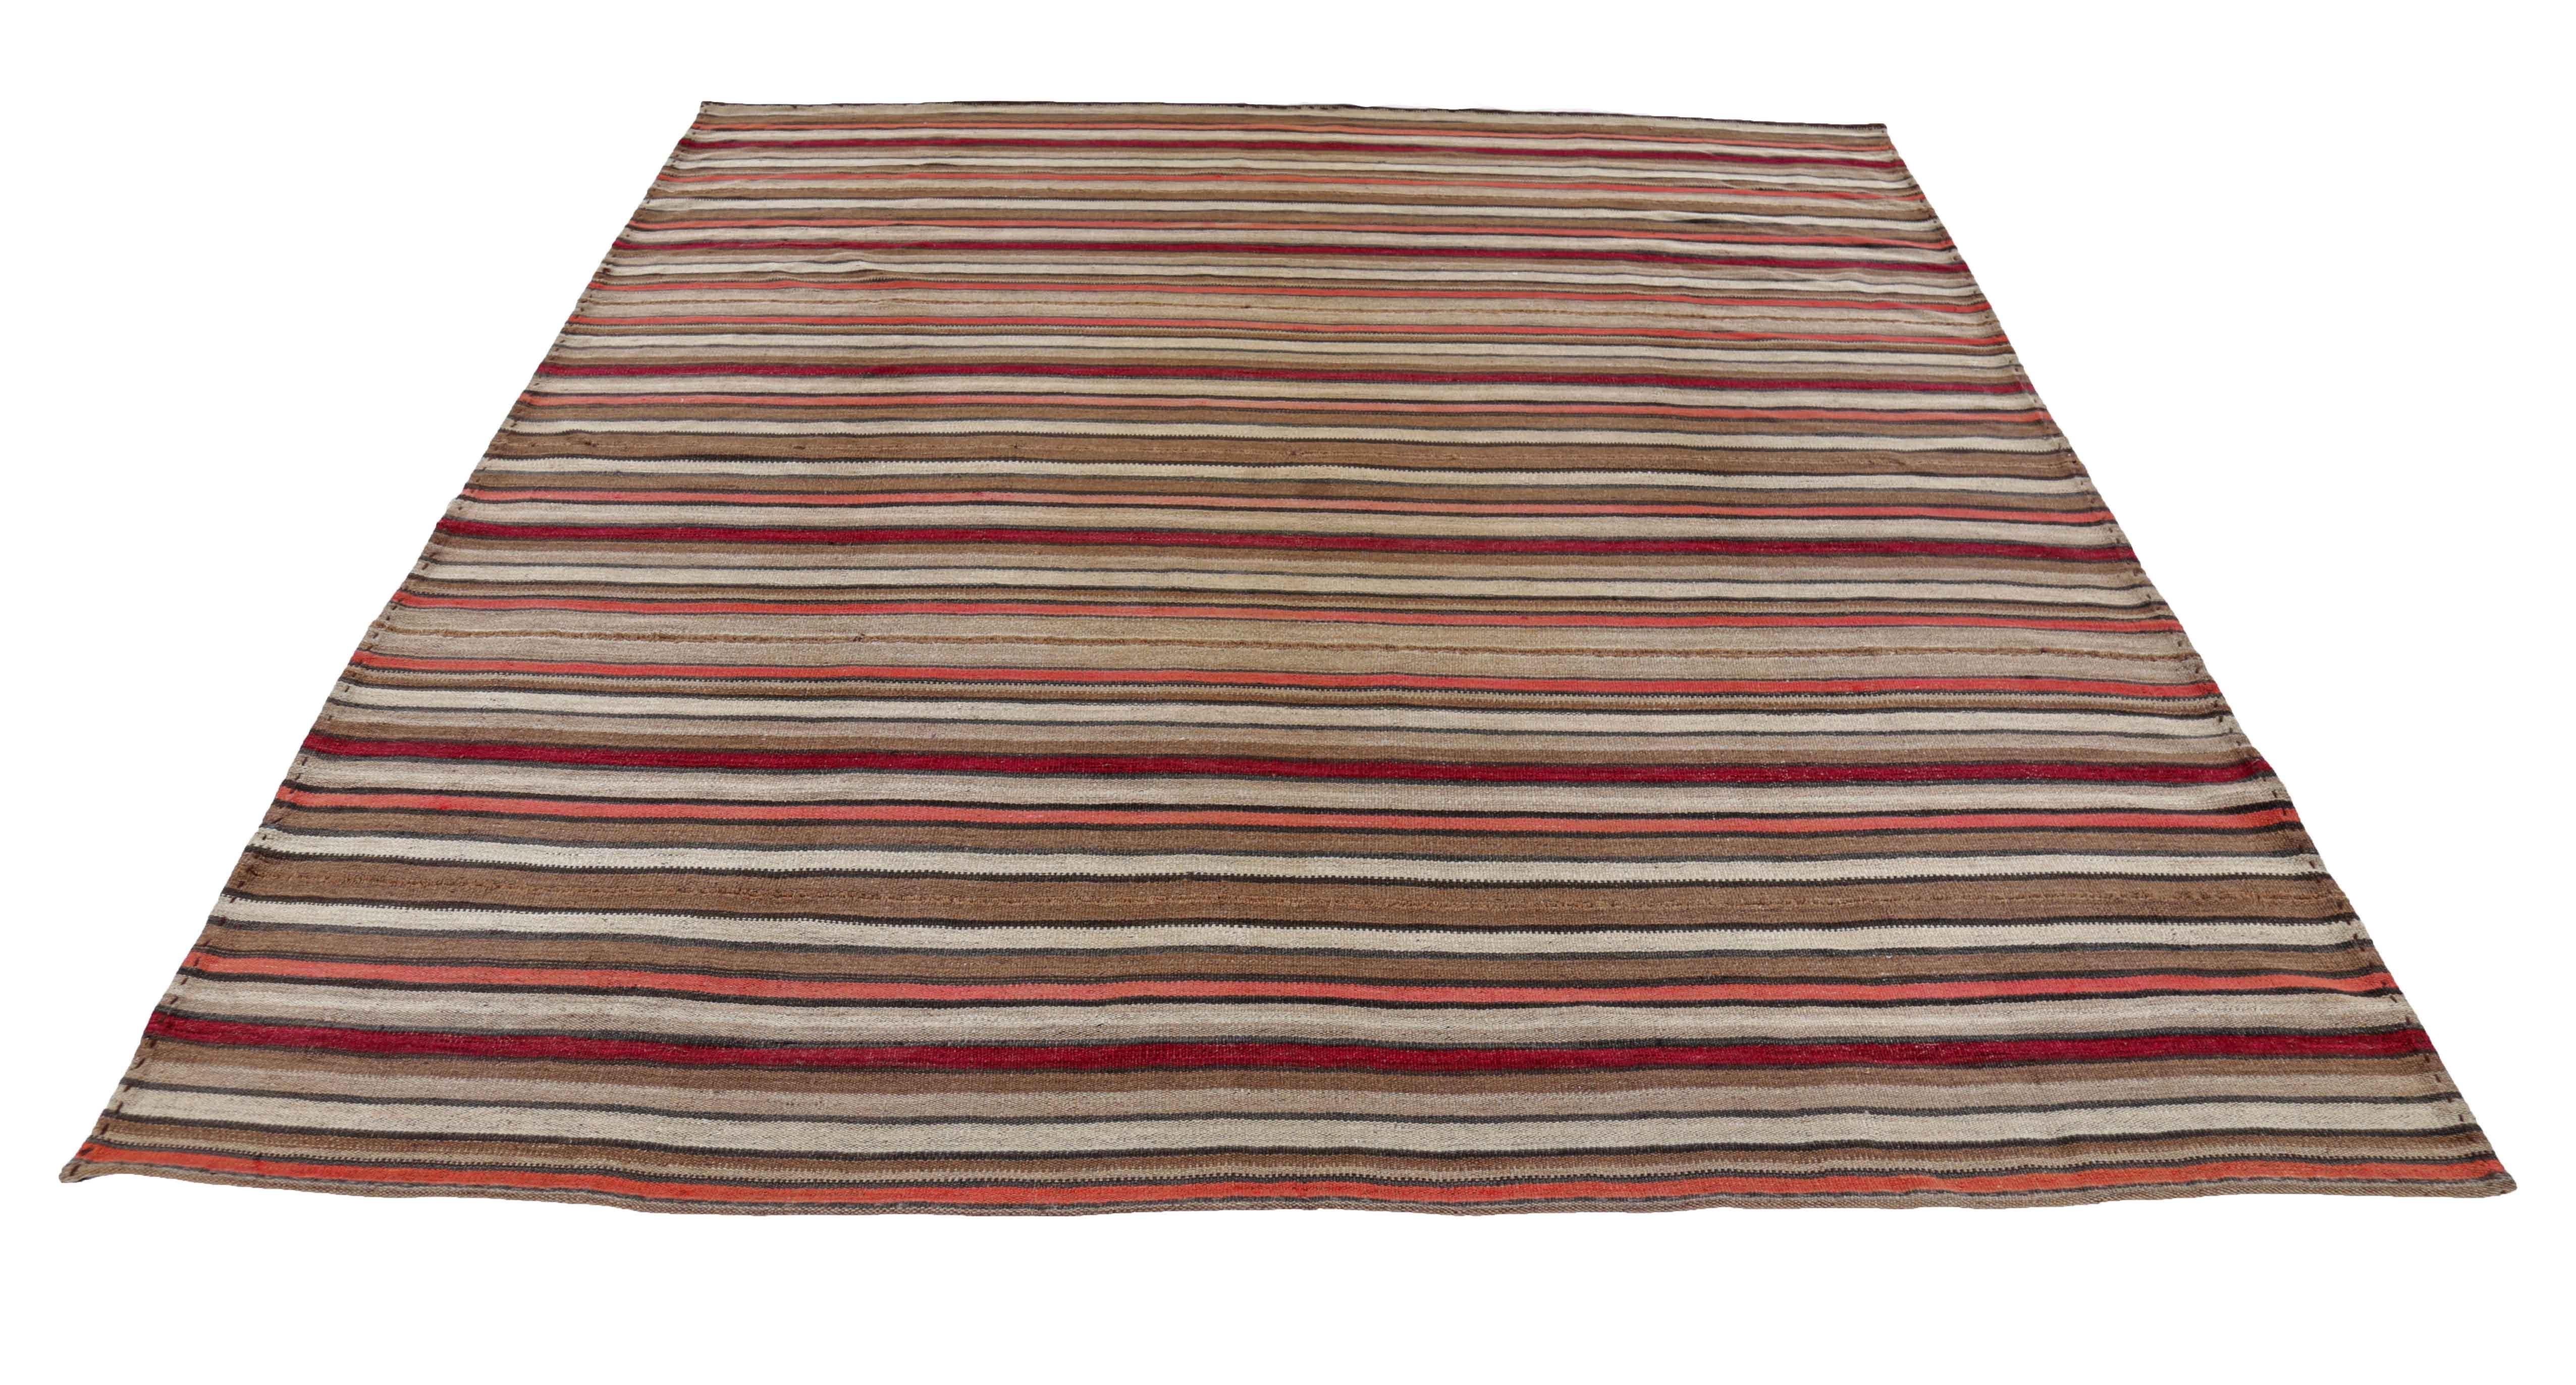 Antique Persian square rug handwoven from the finest sheep’s wool. It’s colored with all-natural vegetable dyes that are safe for humans and pets. It’s a traditional Kilim design handwoven by expert artisans. It’s a lovely square rug that can be